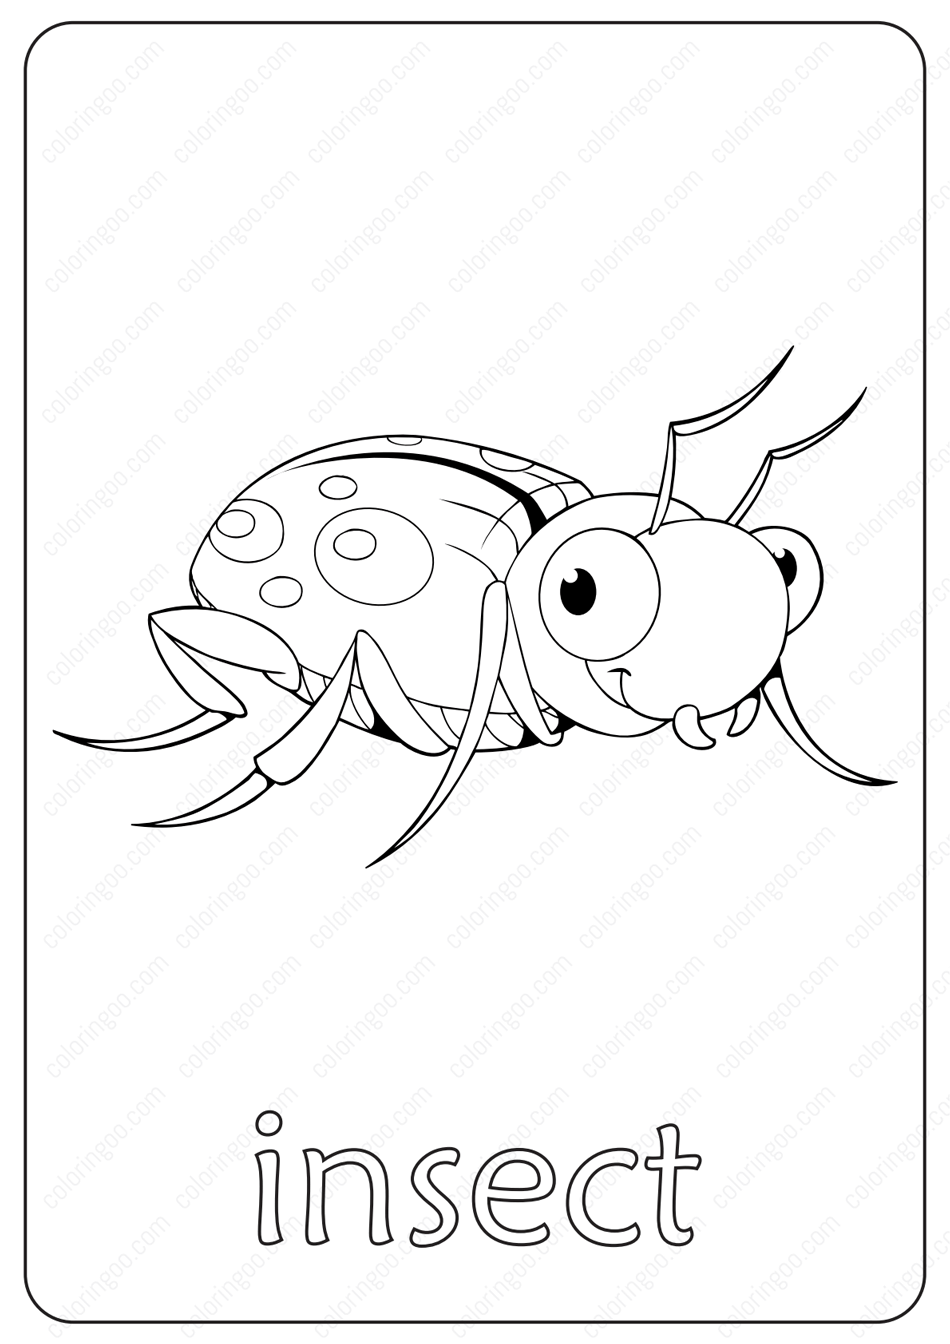 printable insect coloring page book pdf